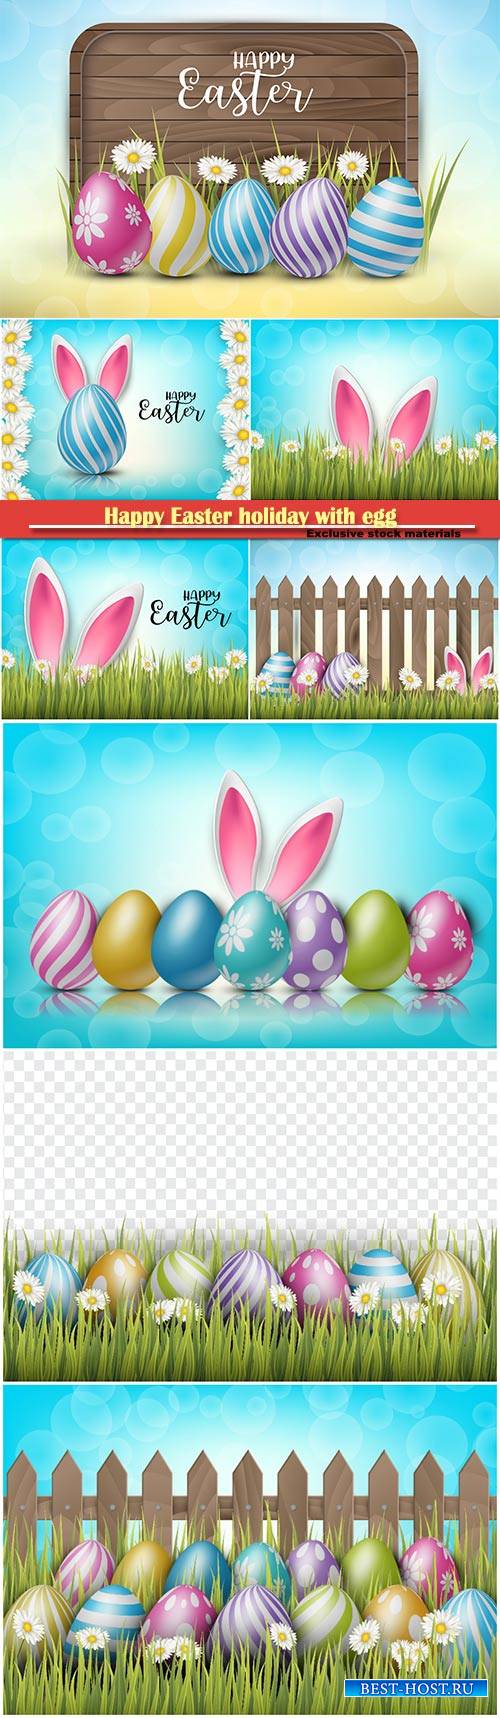 Happy Easter holiday with egg and spring flower vector illustration # 8